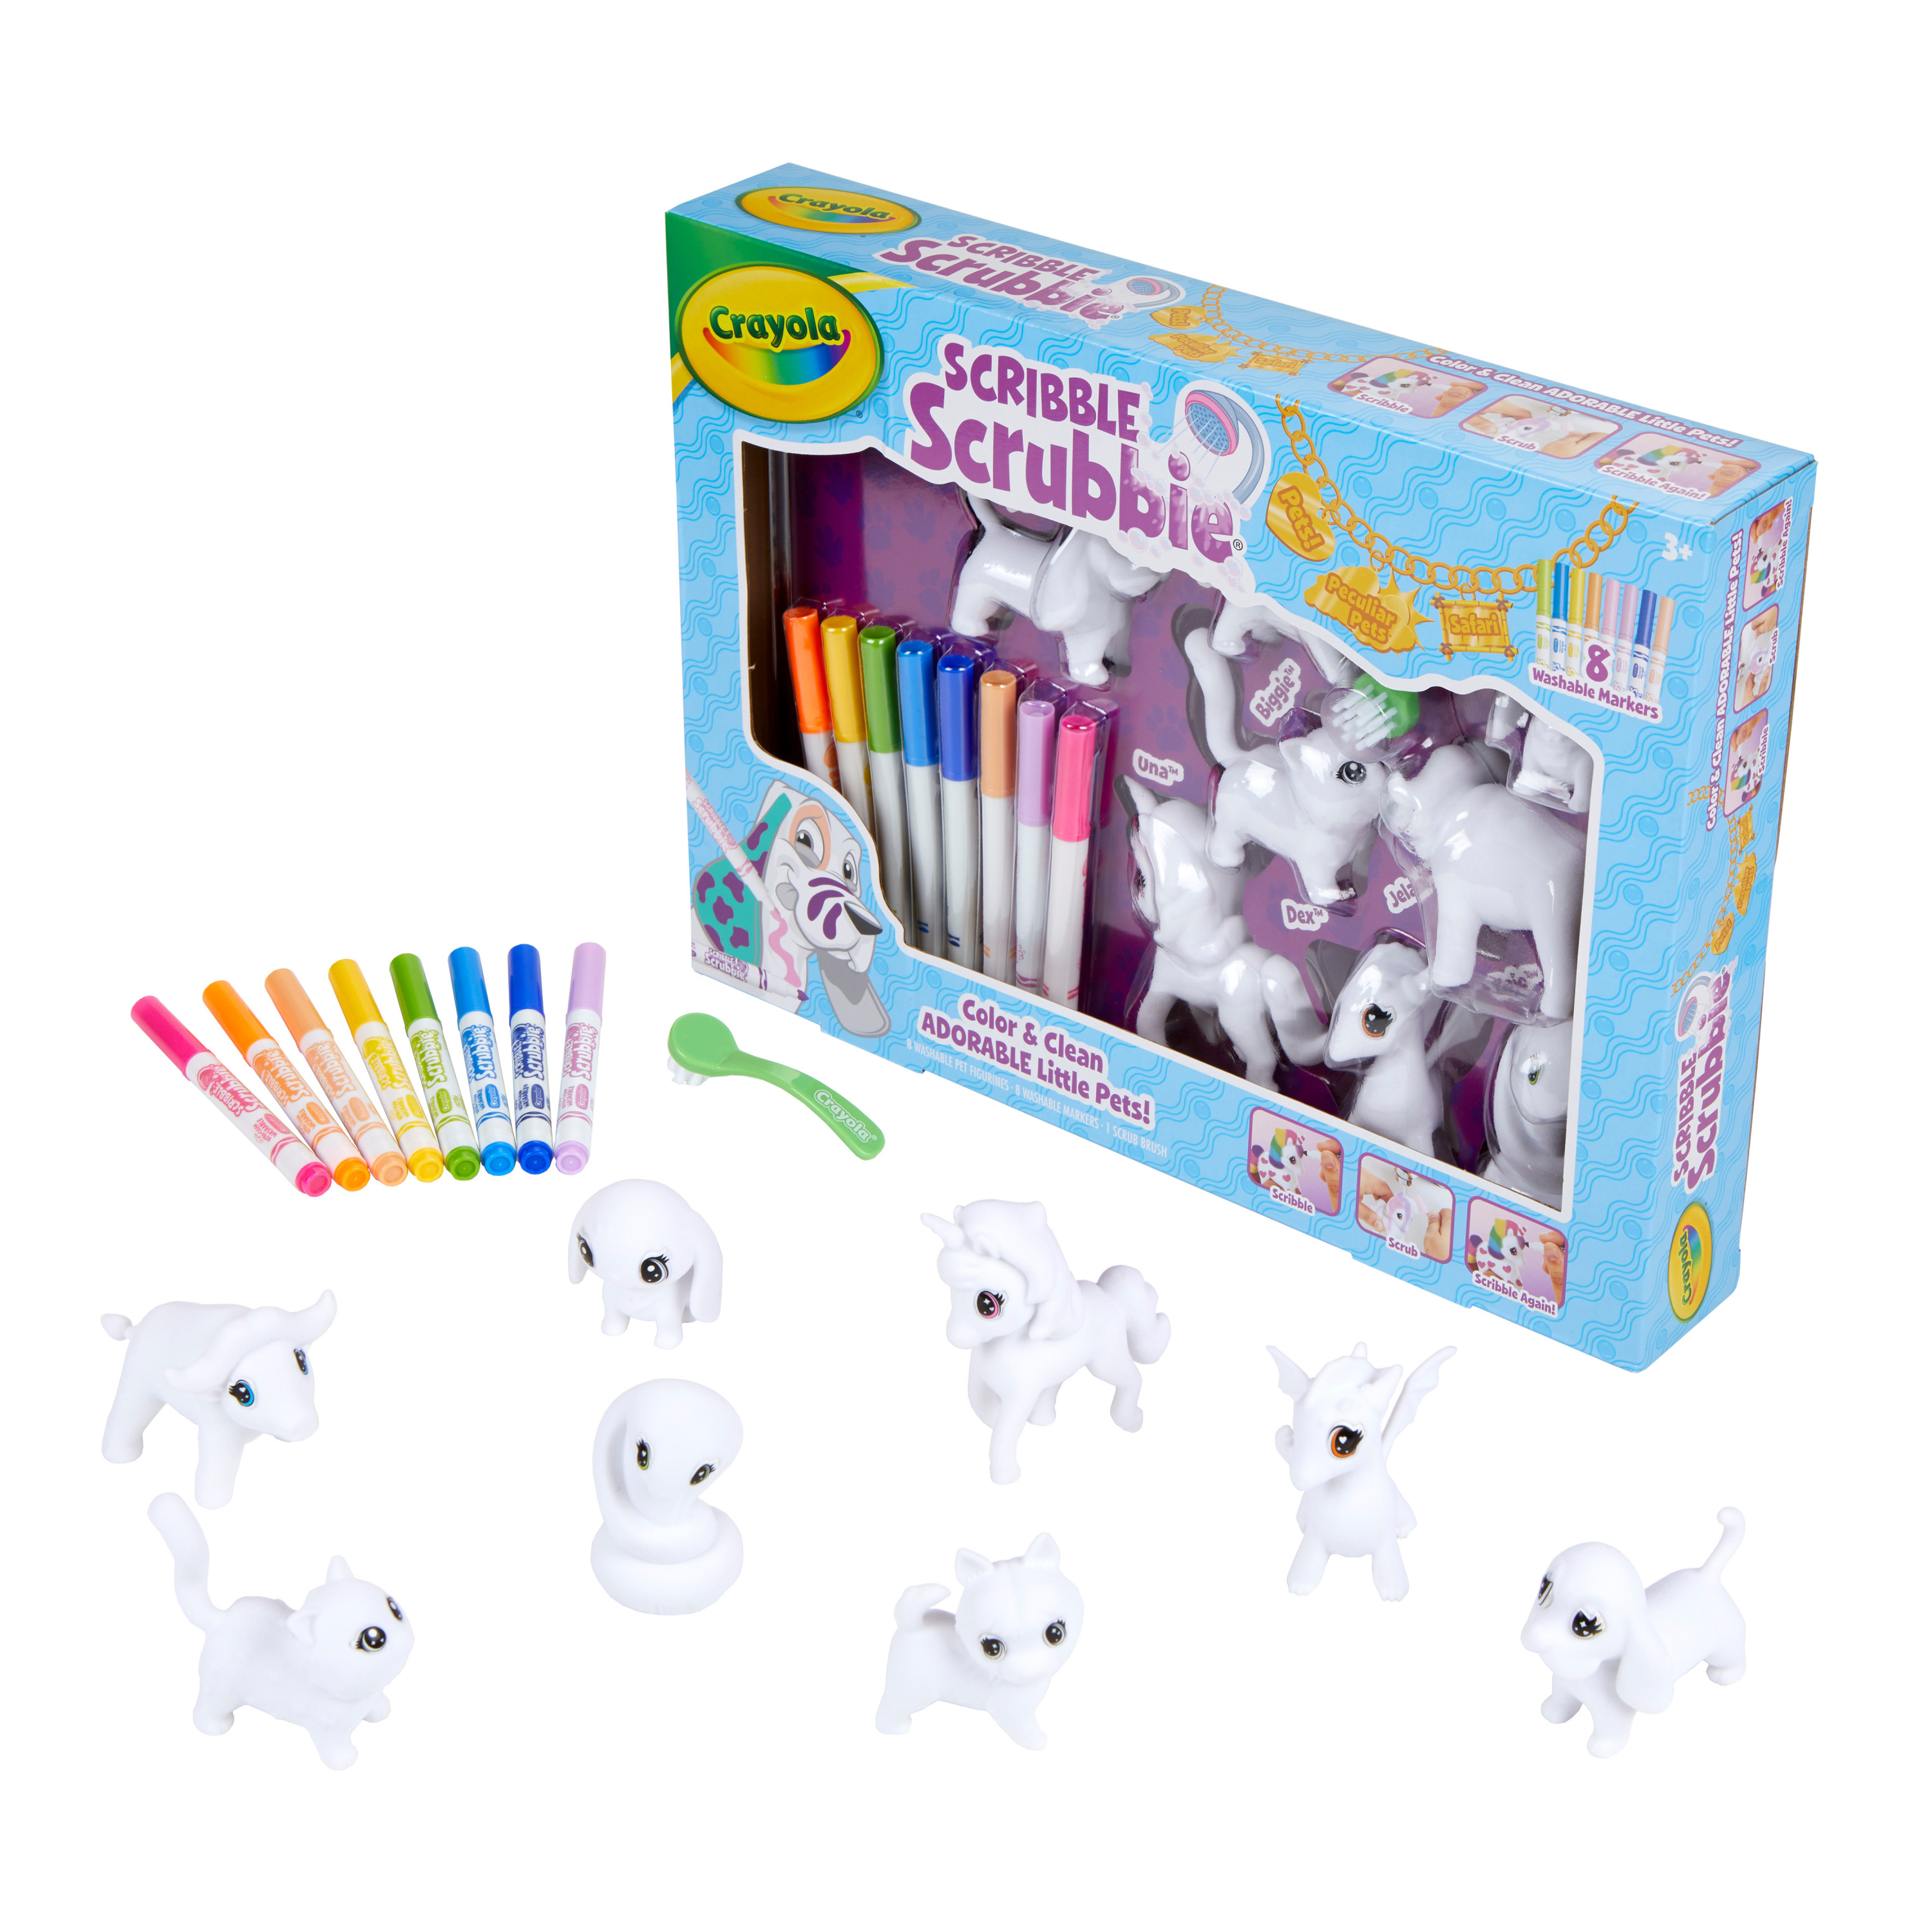 Crayola Scribble Scrubbie Pets, Coloring Toy Animal, Holiday Gift for Kids, Beginner Child - image 1 of 8